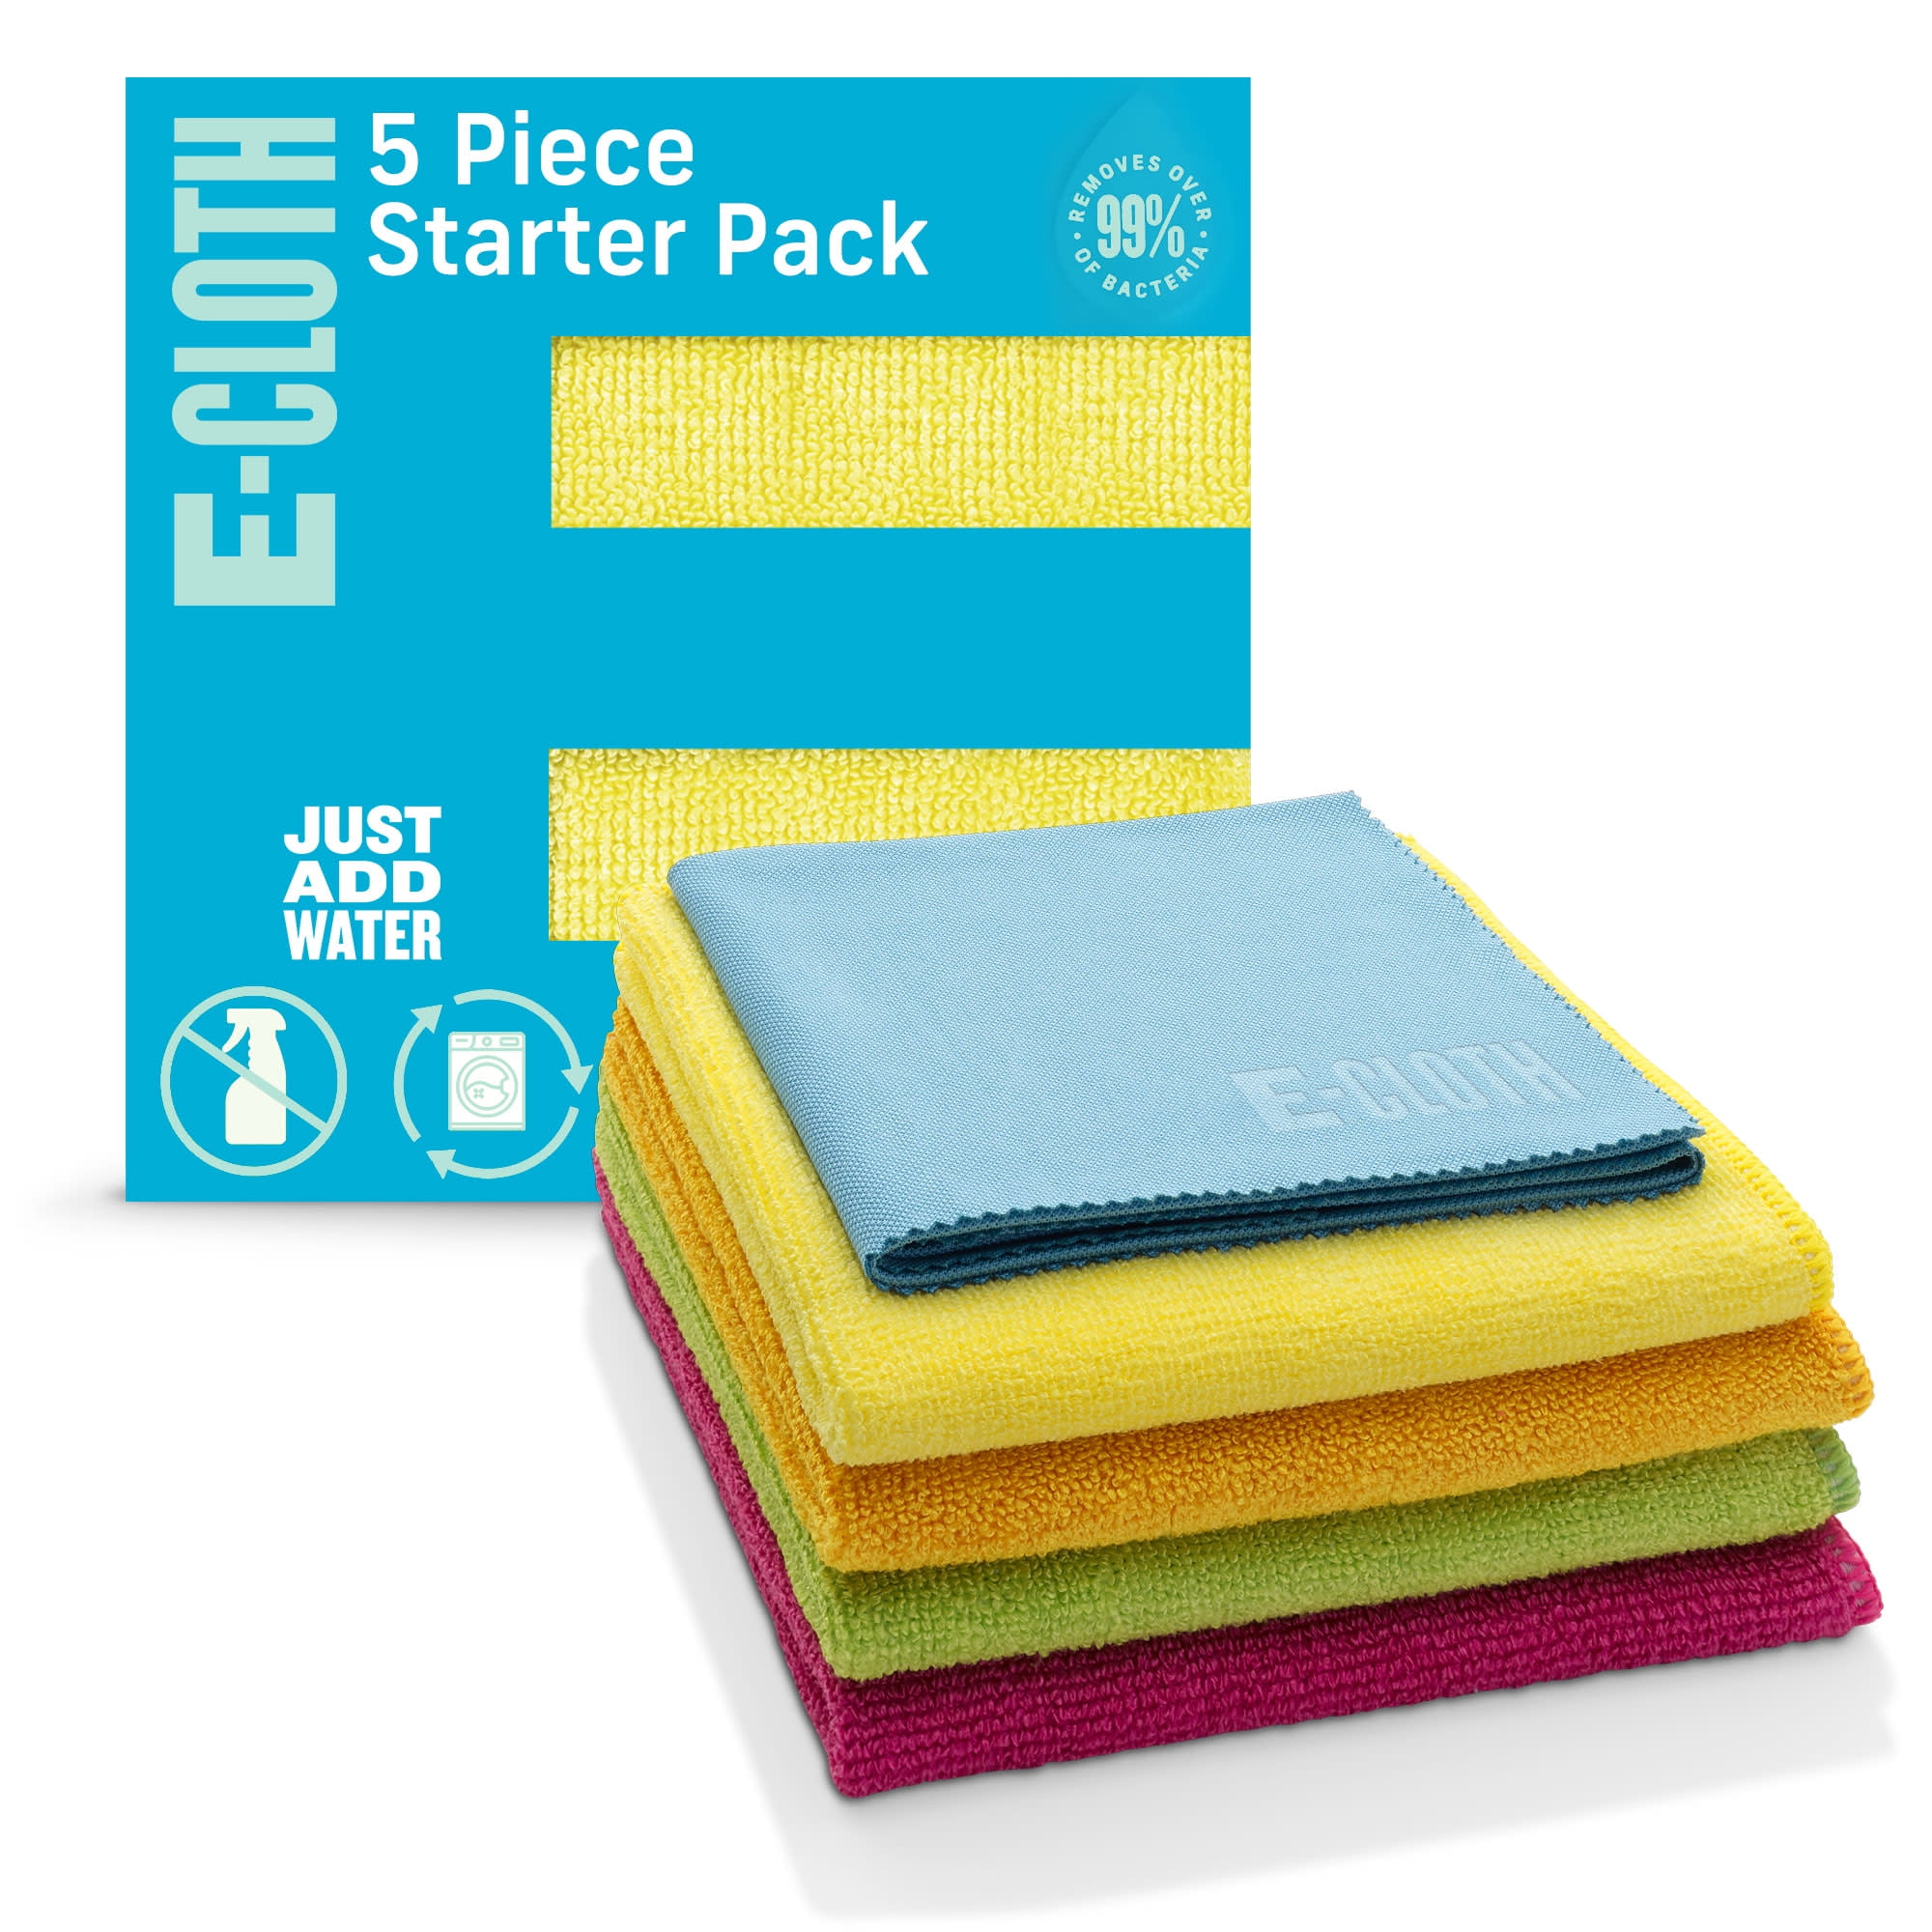 3 Dupont Lint Free Cloths Perfect for Cleaning, Applying Wax and Polishing  Reusable 